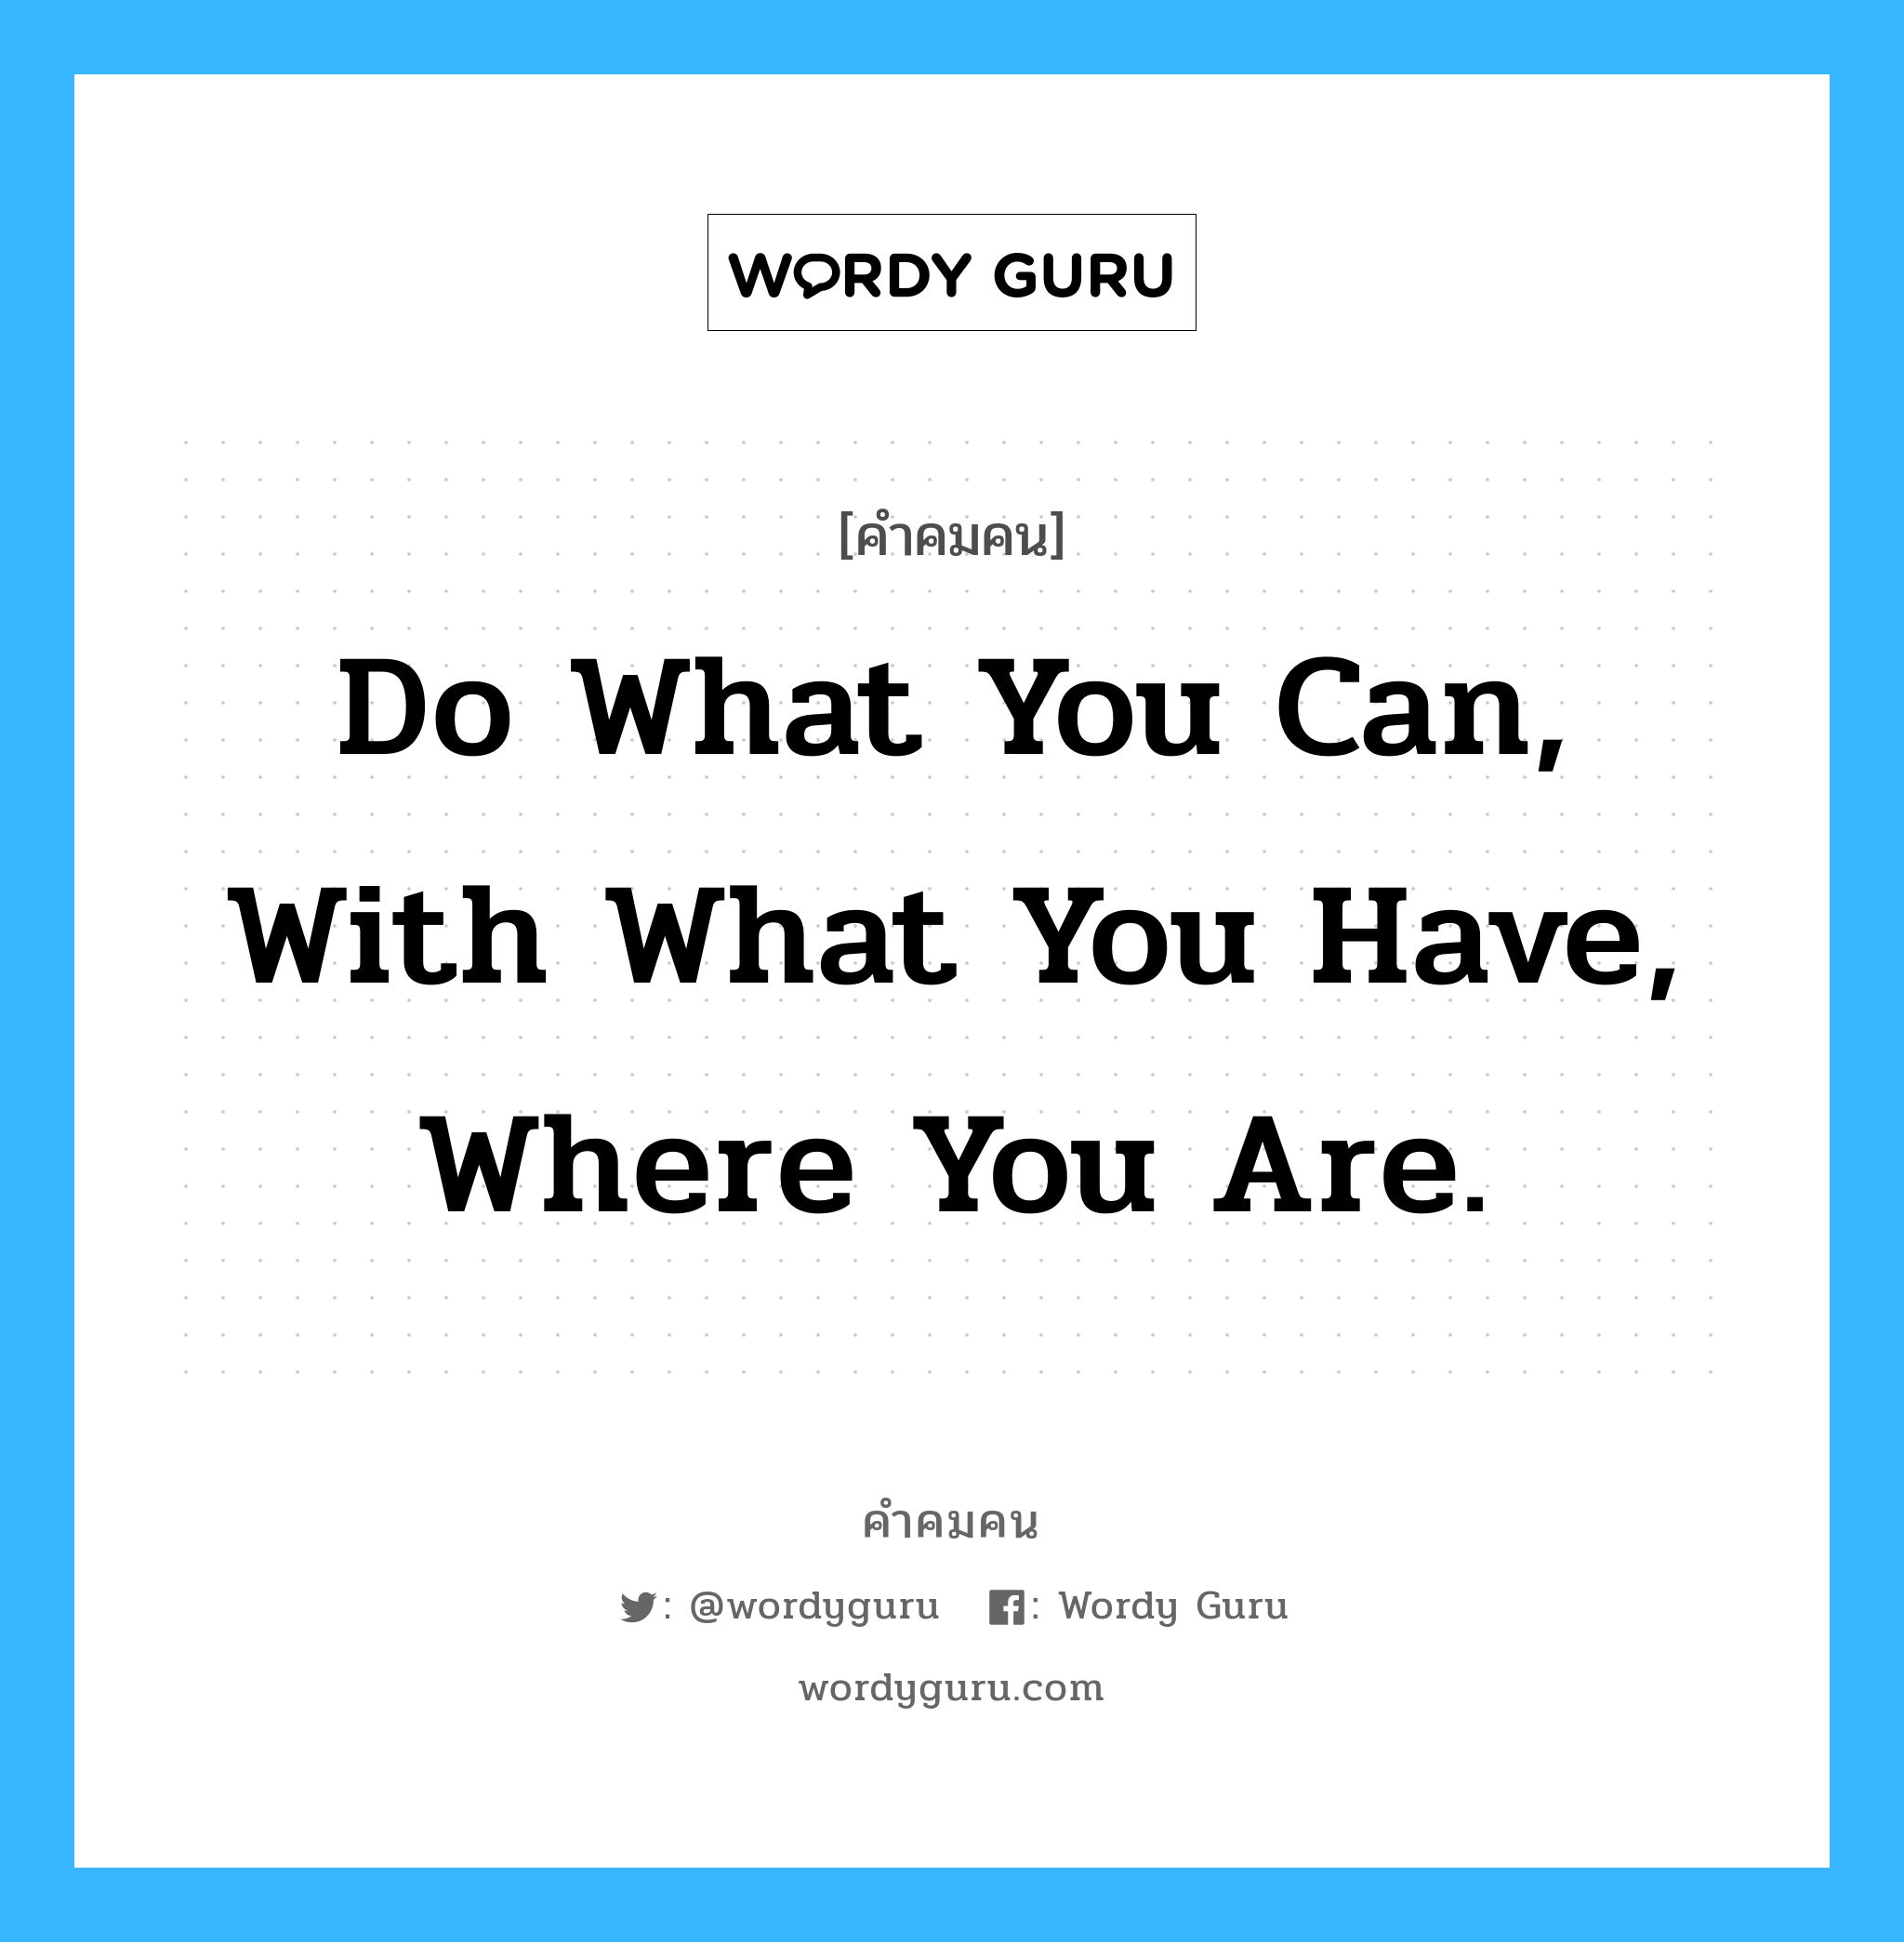 Do what you can, with what you have, where you are., คำคมคน Do what you can, with what you have, where you are. ทำในสิ่งที่คุณสามารถจะทำได้ พร้อมกับสิ่งที่คุณมีและที่ที่คุณอยู่ Theodore Roosevelt หมวด Theodore Roosevelt